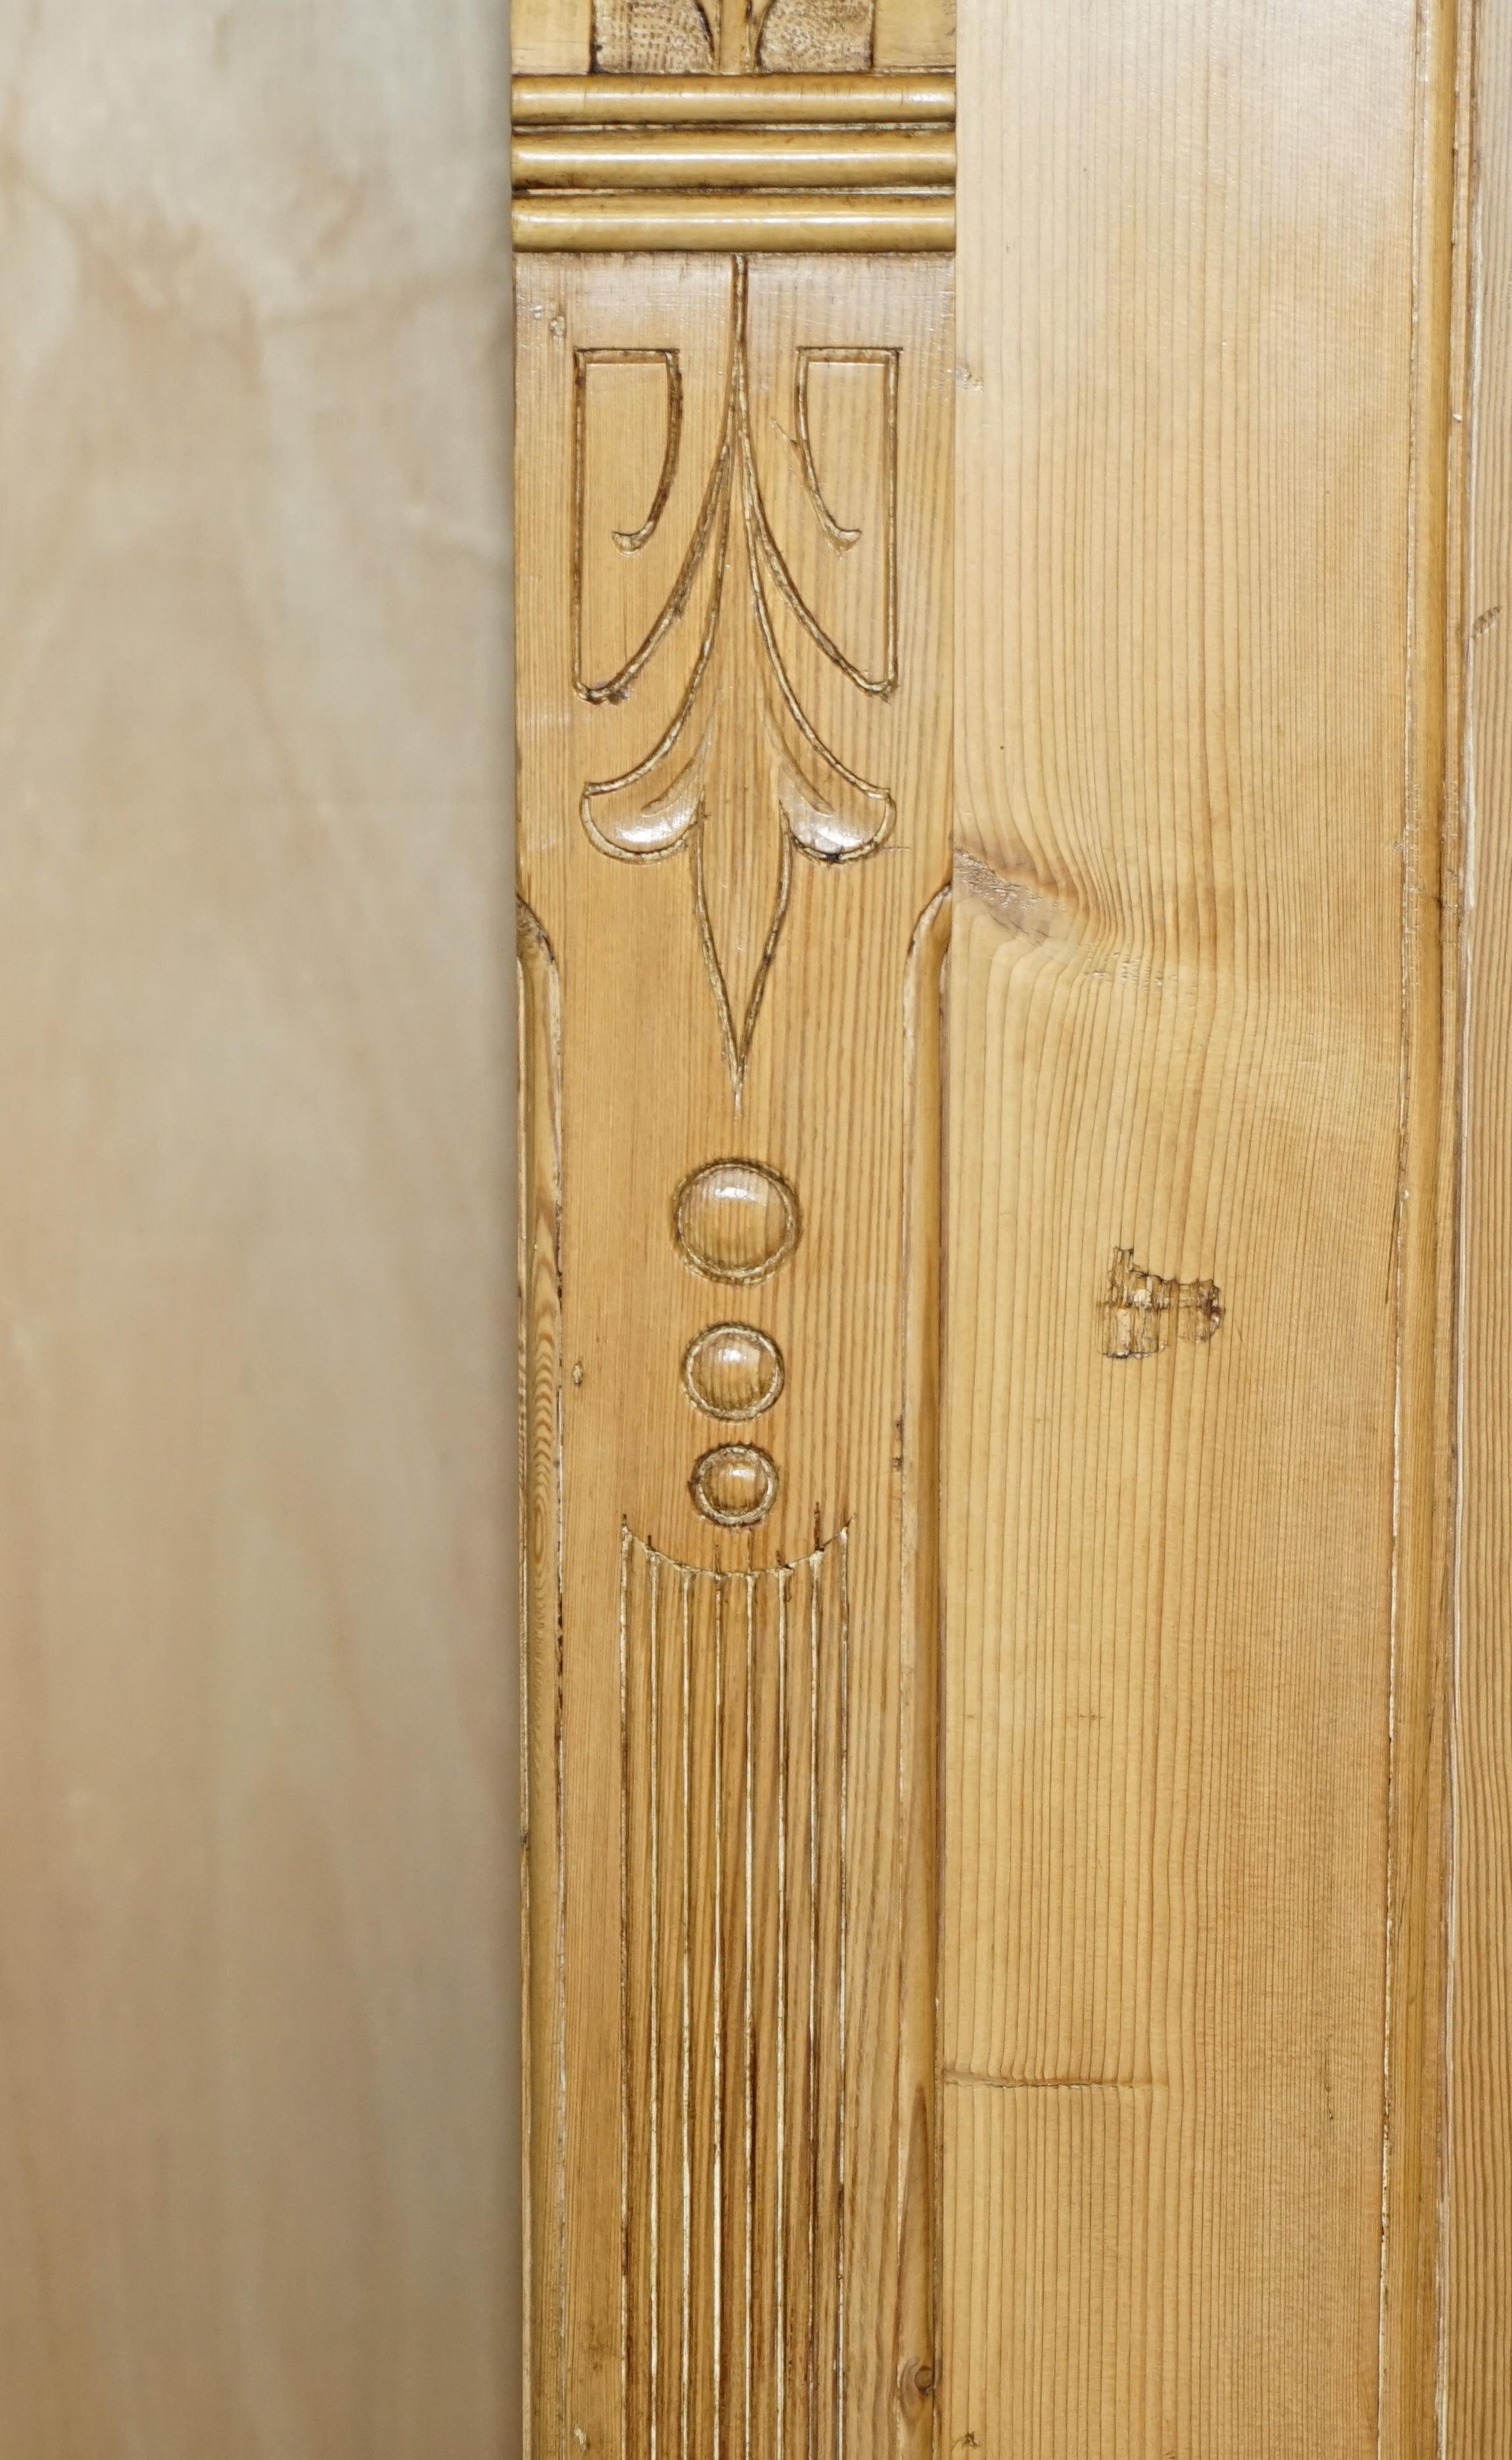 Hand-Crafted HUGE ViNTAGE HAND CARVED SWEDISH PINE WARDROBE ARMOIRE MASSIVE STORAGE SPACE For Sale